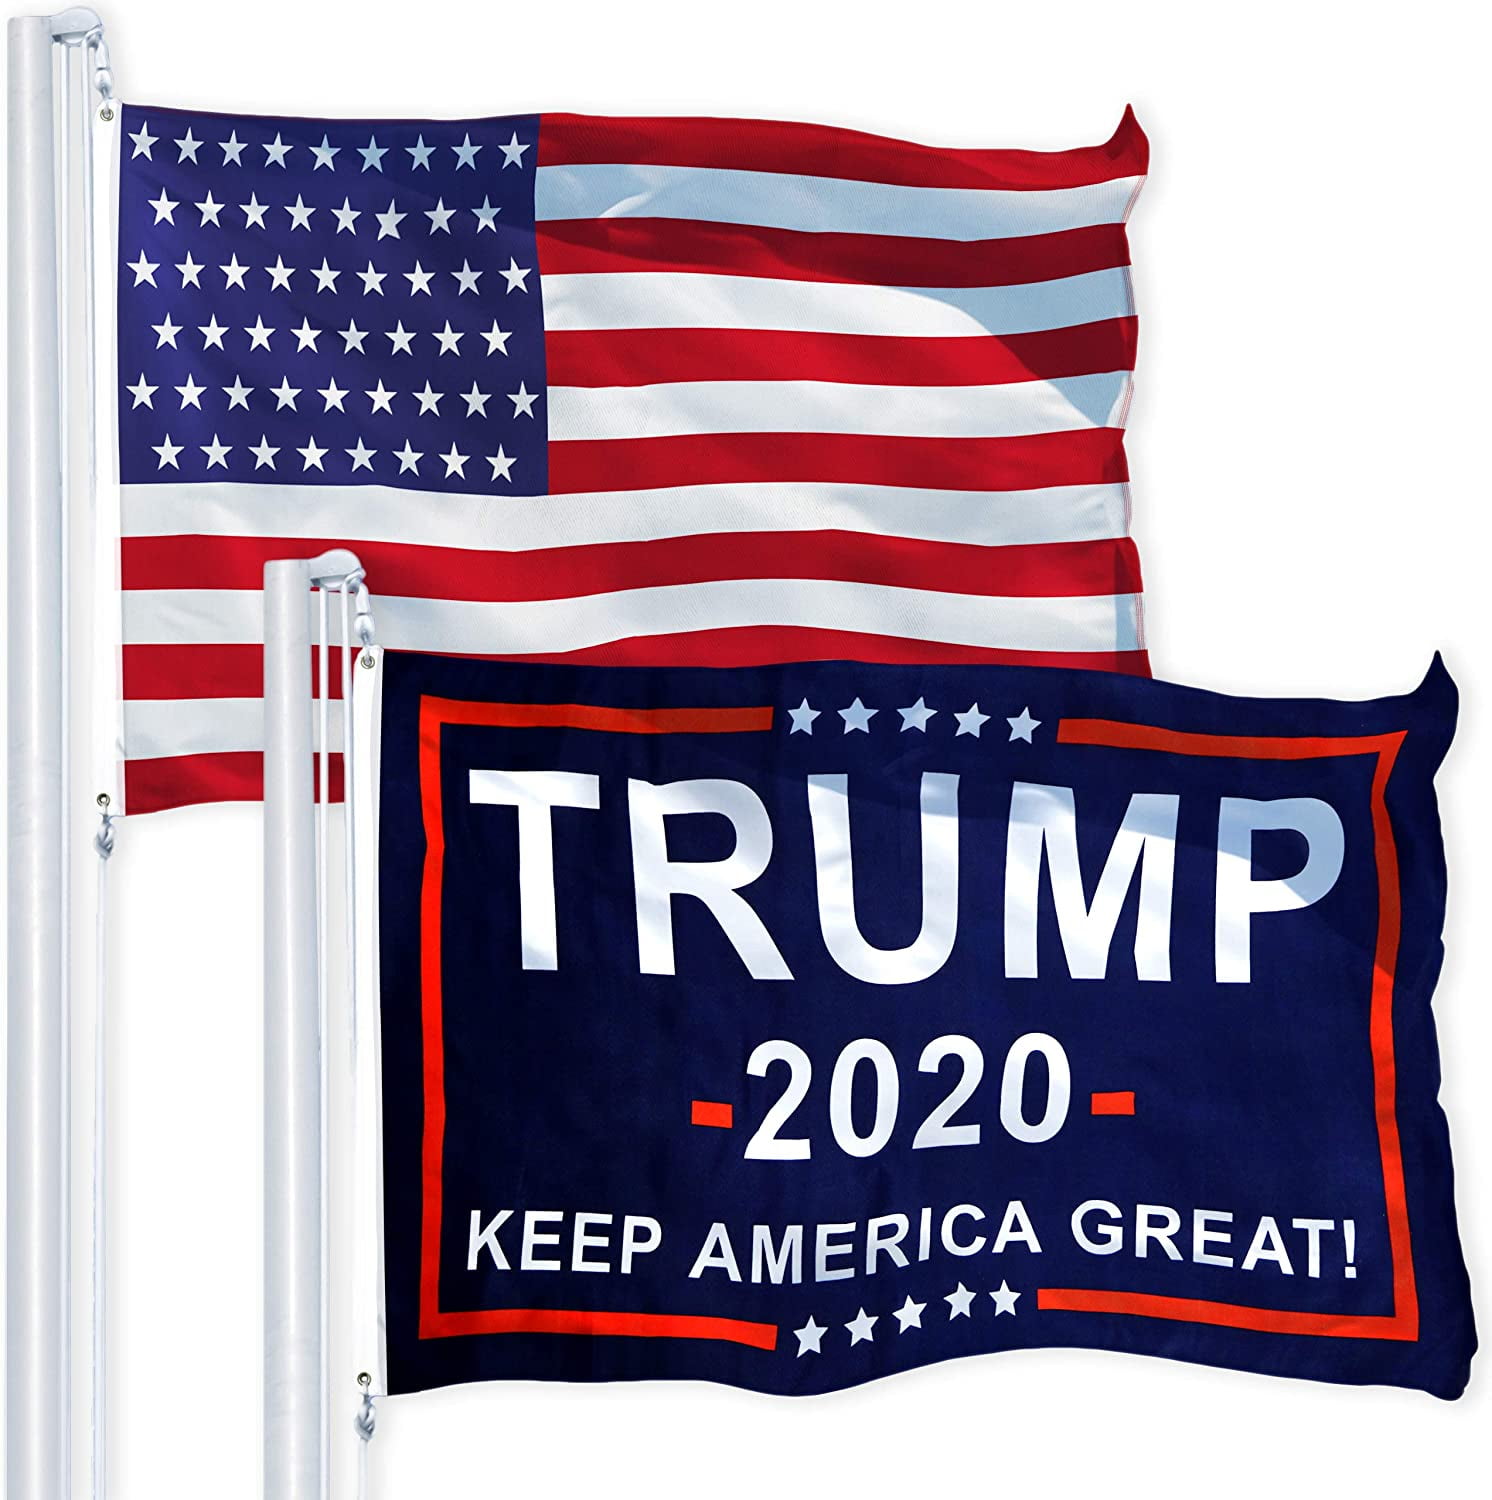 Trump Red Polyester Flag 3'x5' Grommets FI 3x5 Keep America Great Donald J 